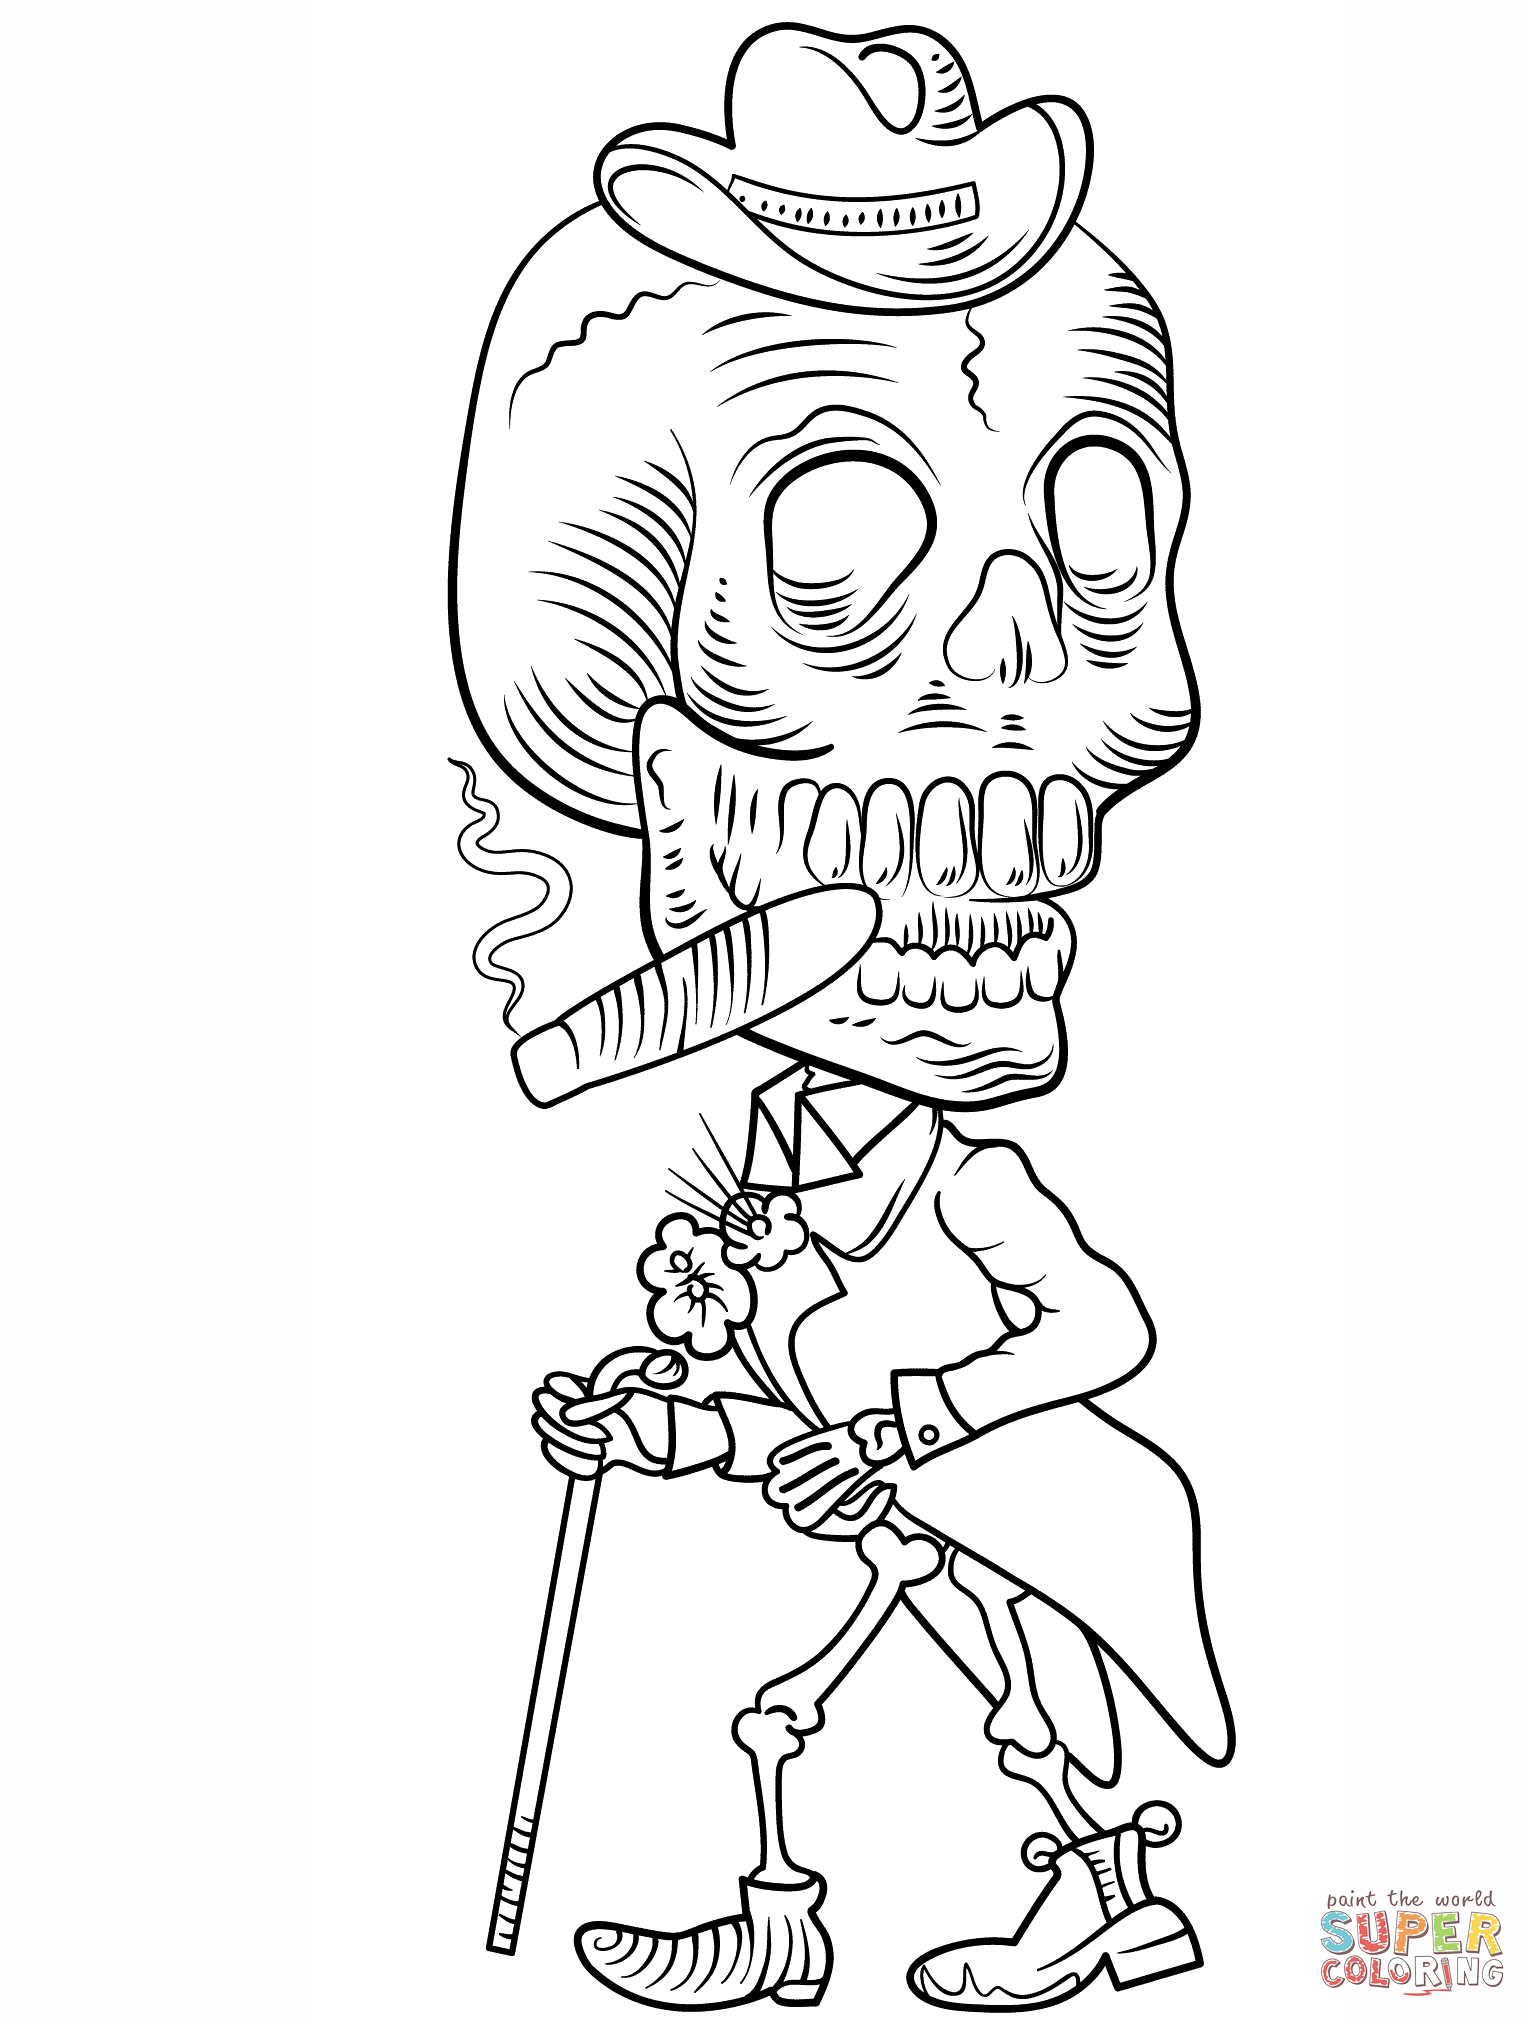 Day Of The Dead Skeleton Coloring Page | Free Printable Coloring Pages - Free Printable Skeleton Coloring Pages